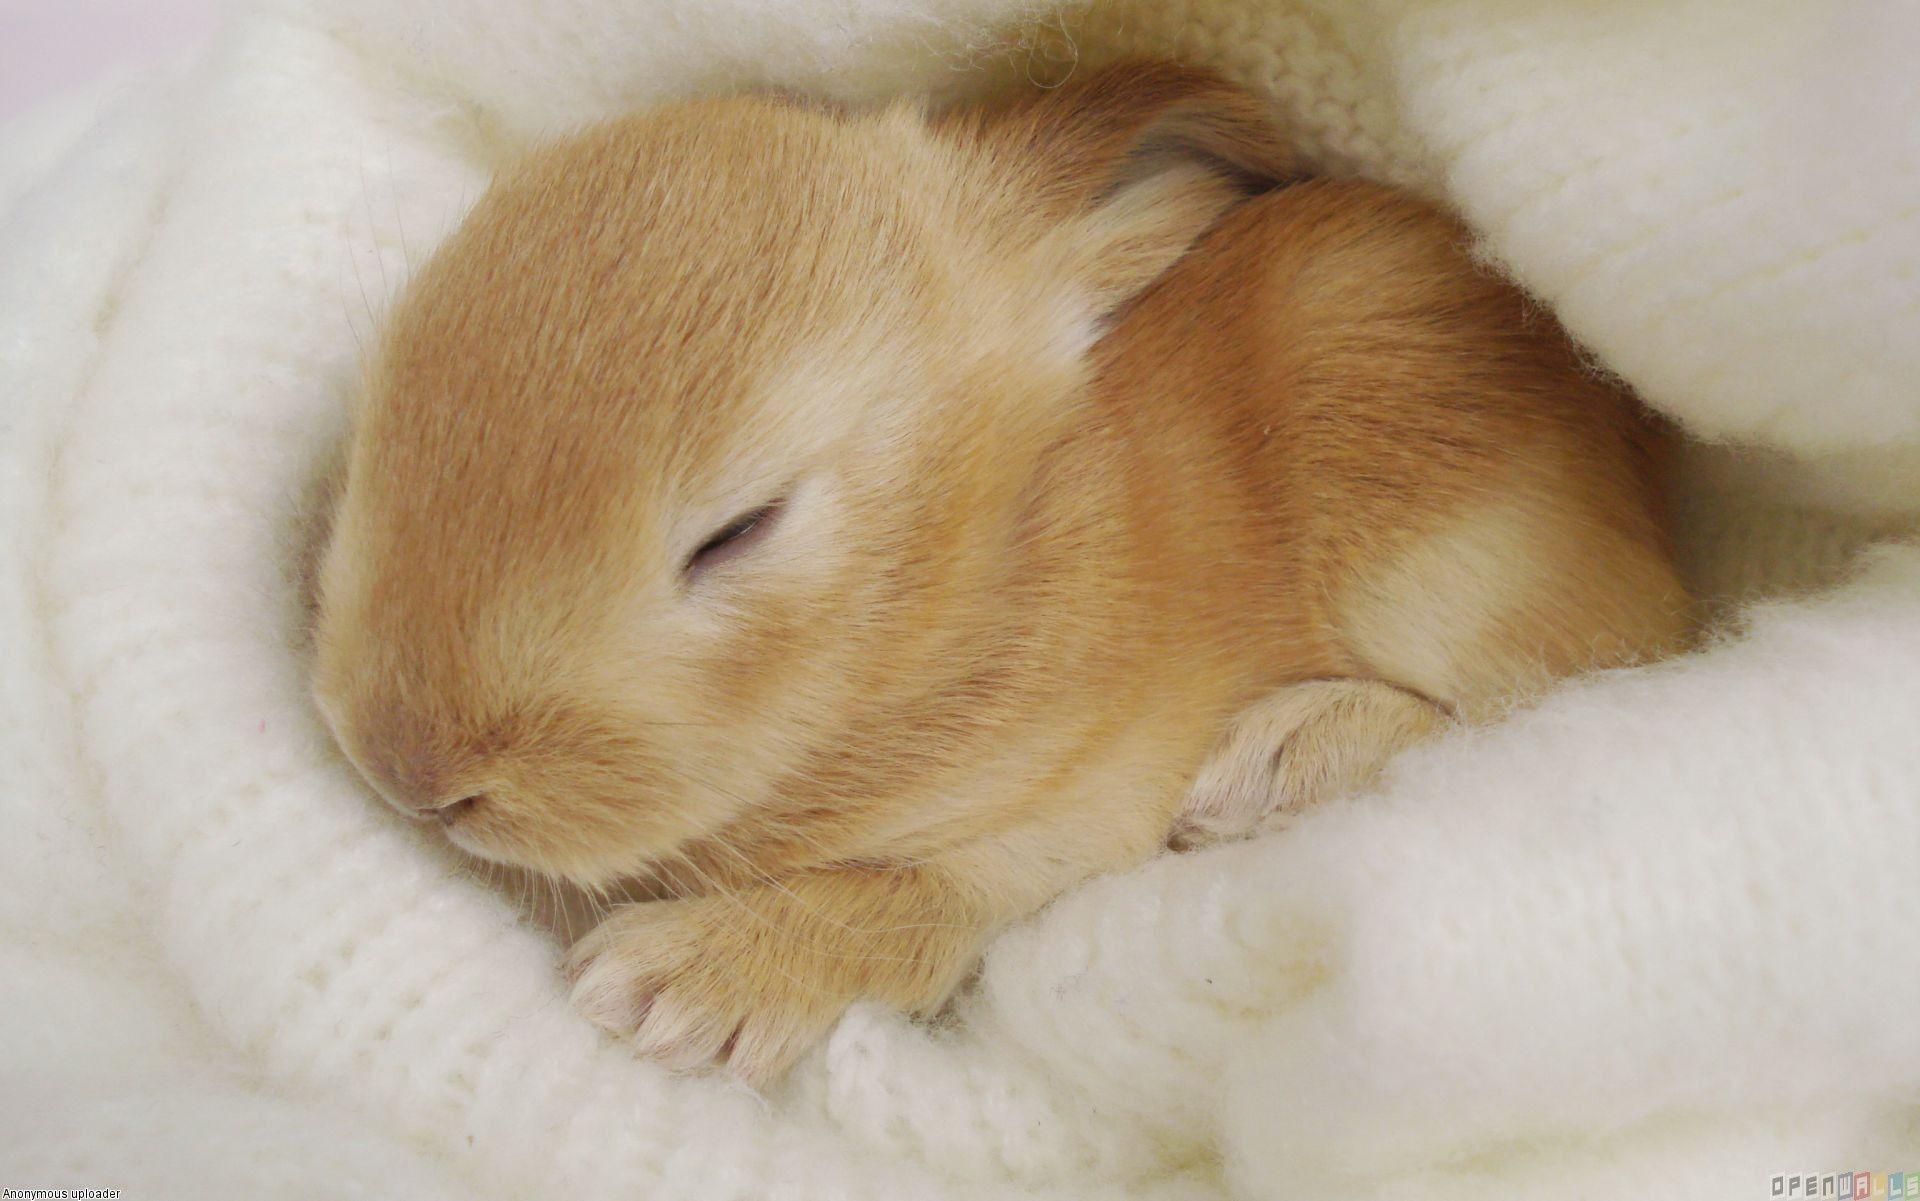 Cute Bunny Picture Wallpaper 1920x1201 px Free Download